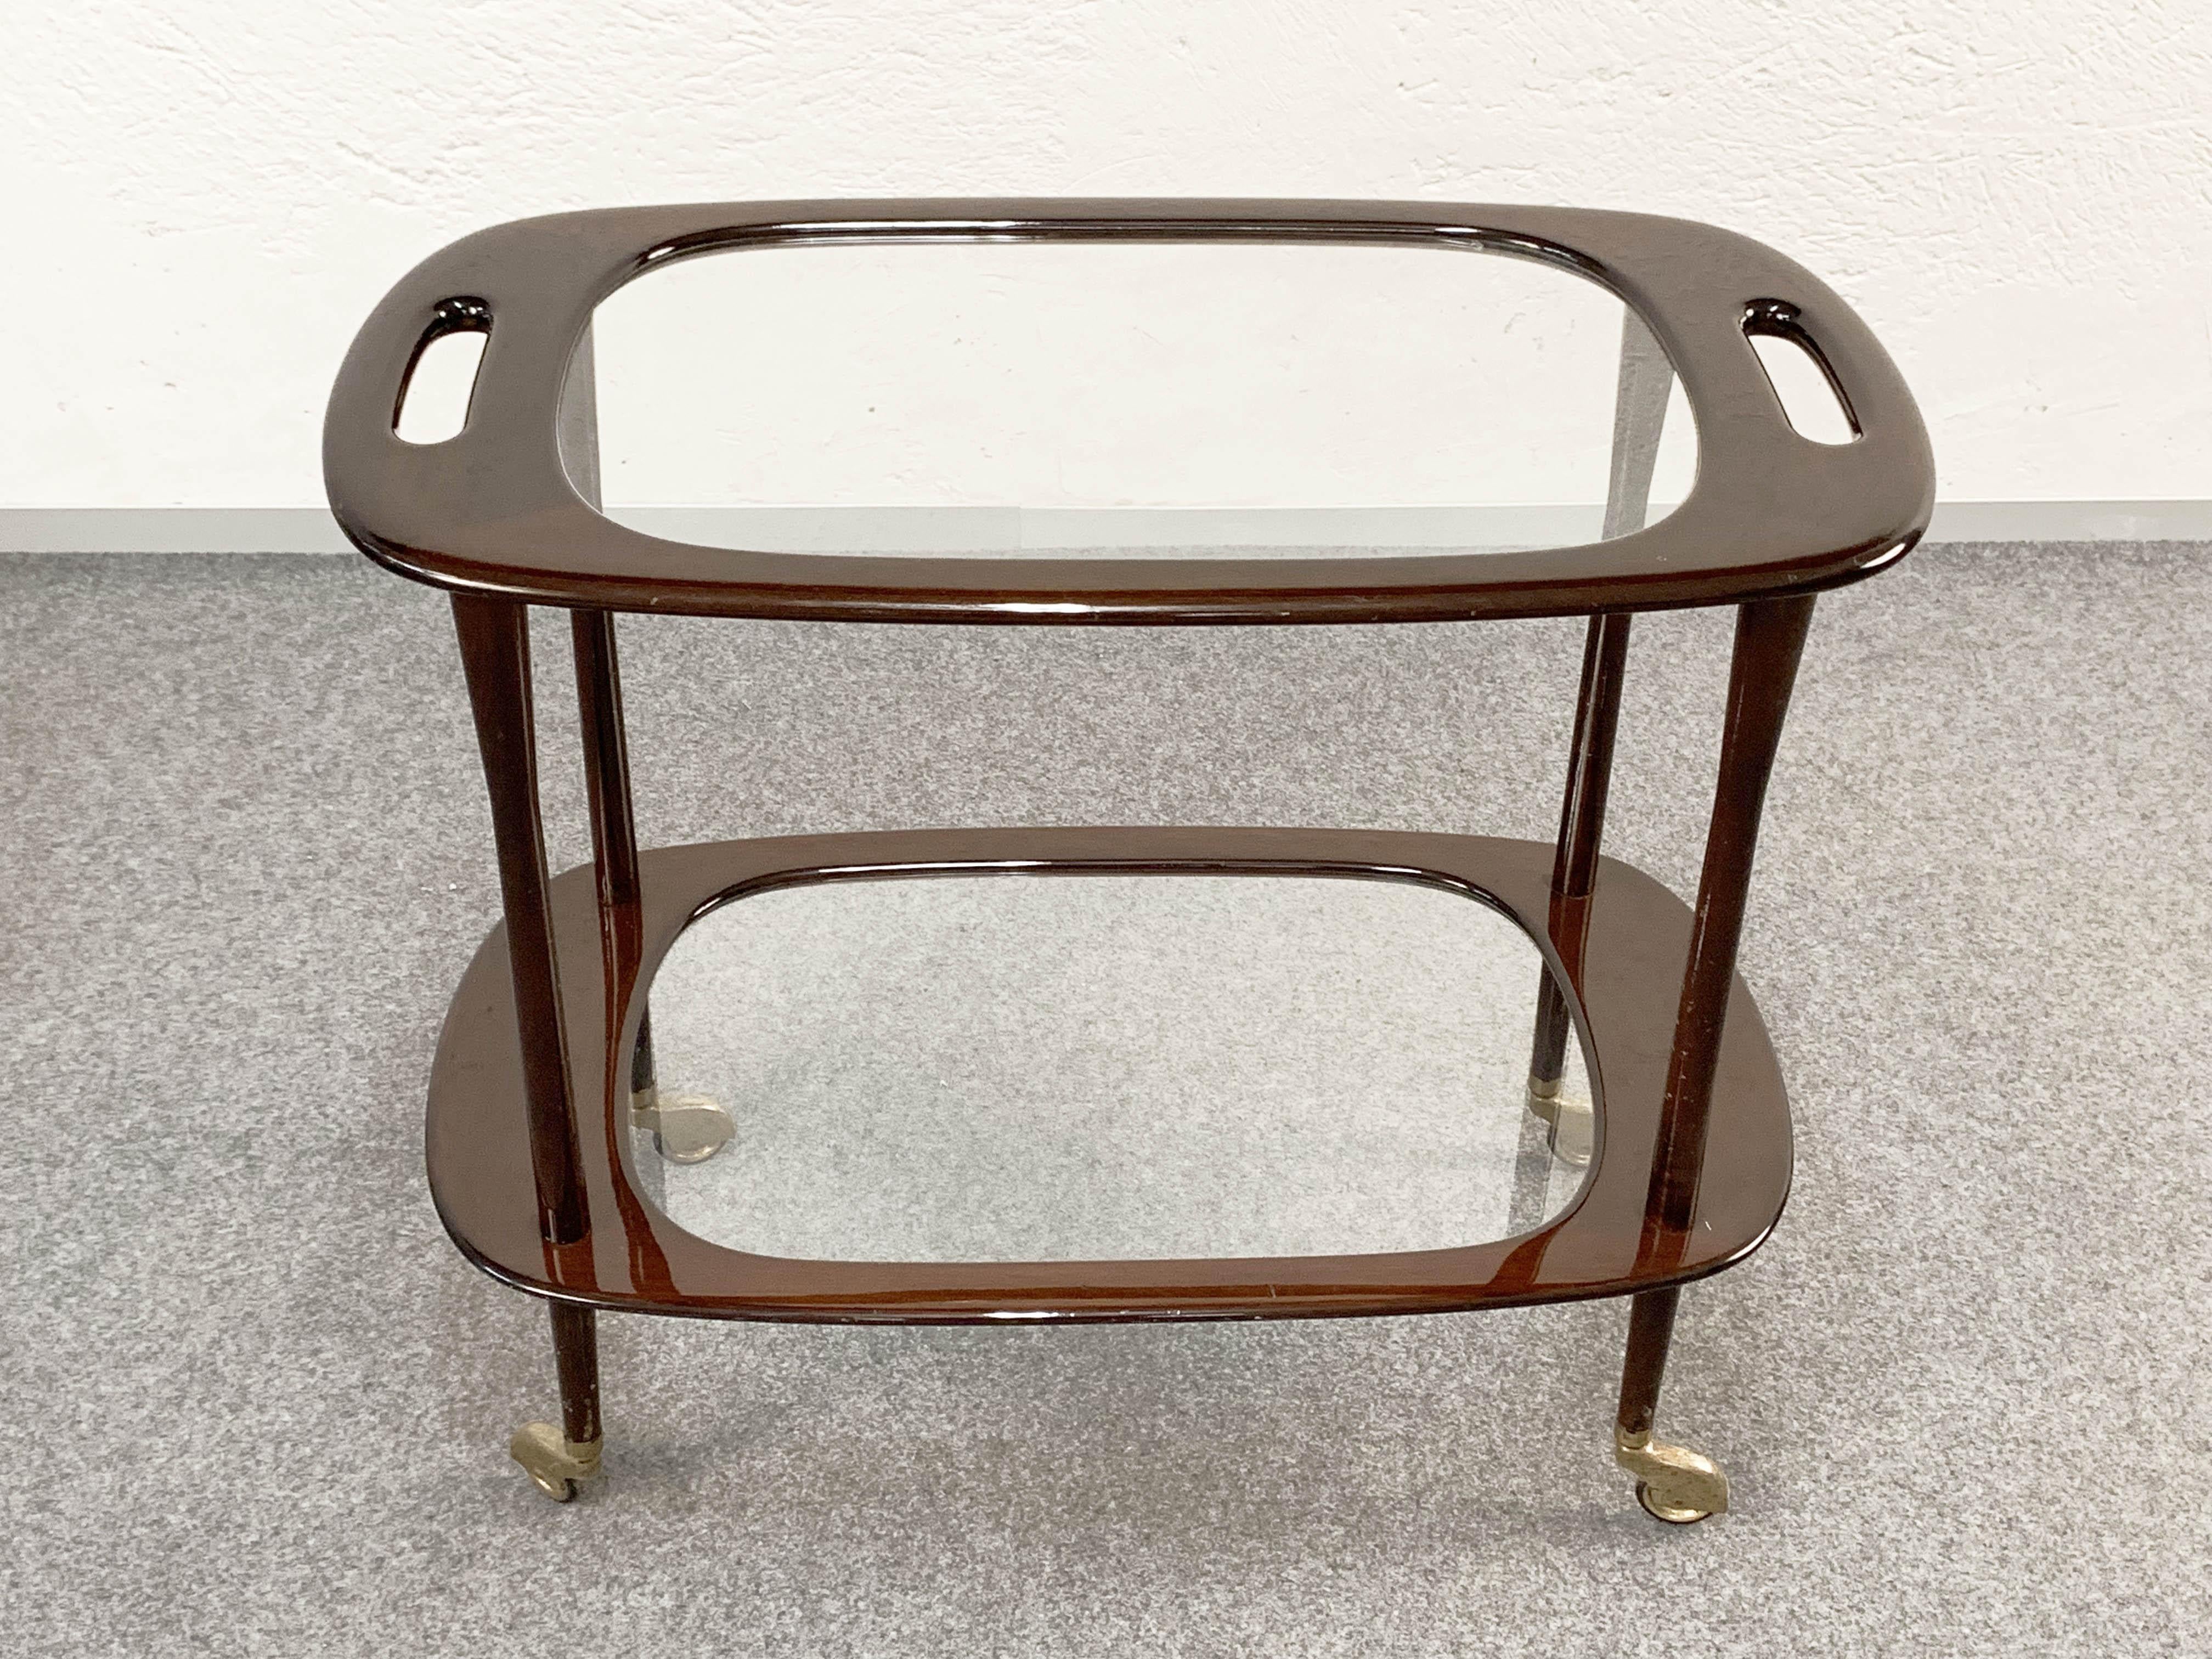 Wooden trolley designed by Cesare Lacca for Casina in the 1950s.
Produced in Italy
Made of solid mahogany wood with original glass
Guide on brass wheels
In original conditions.